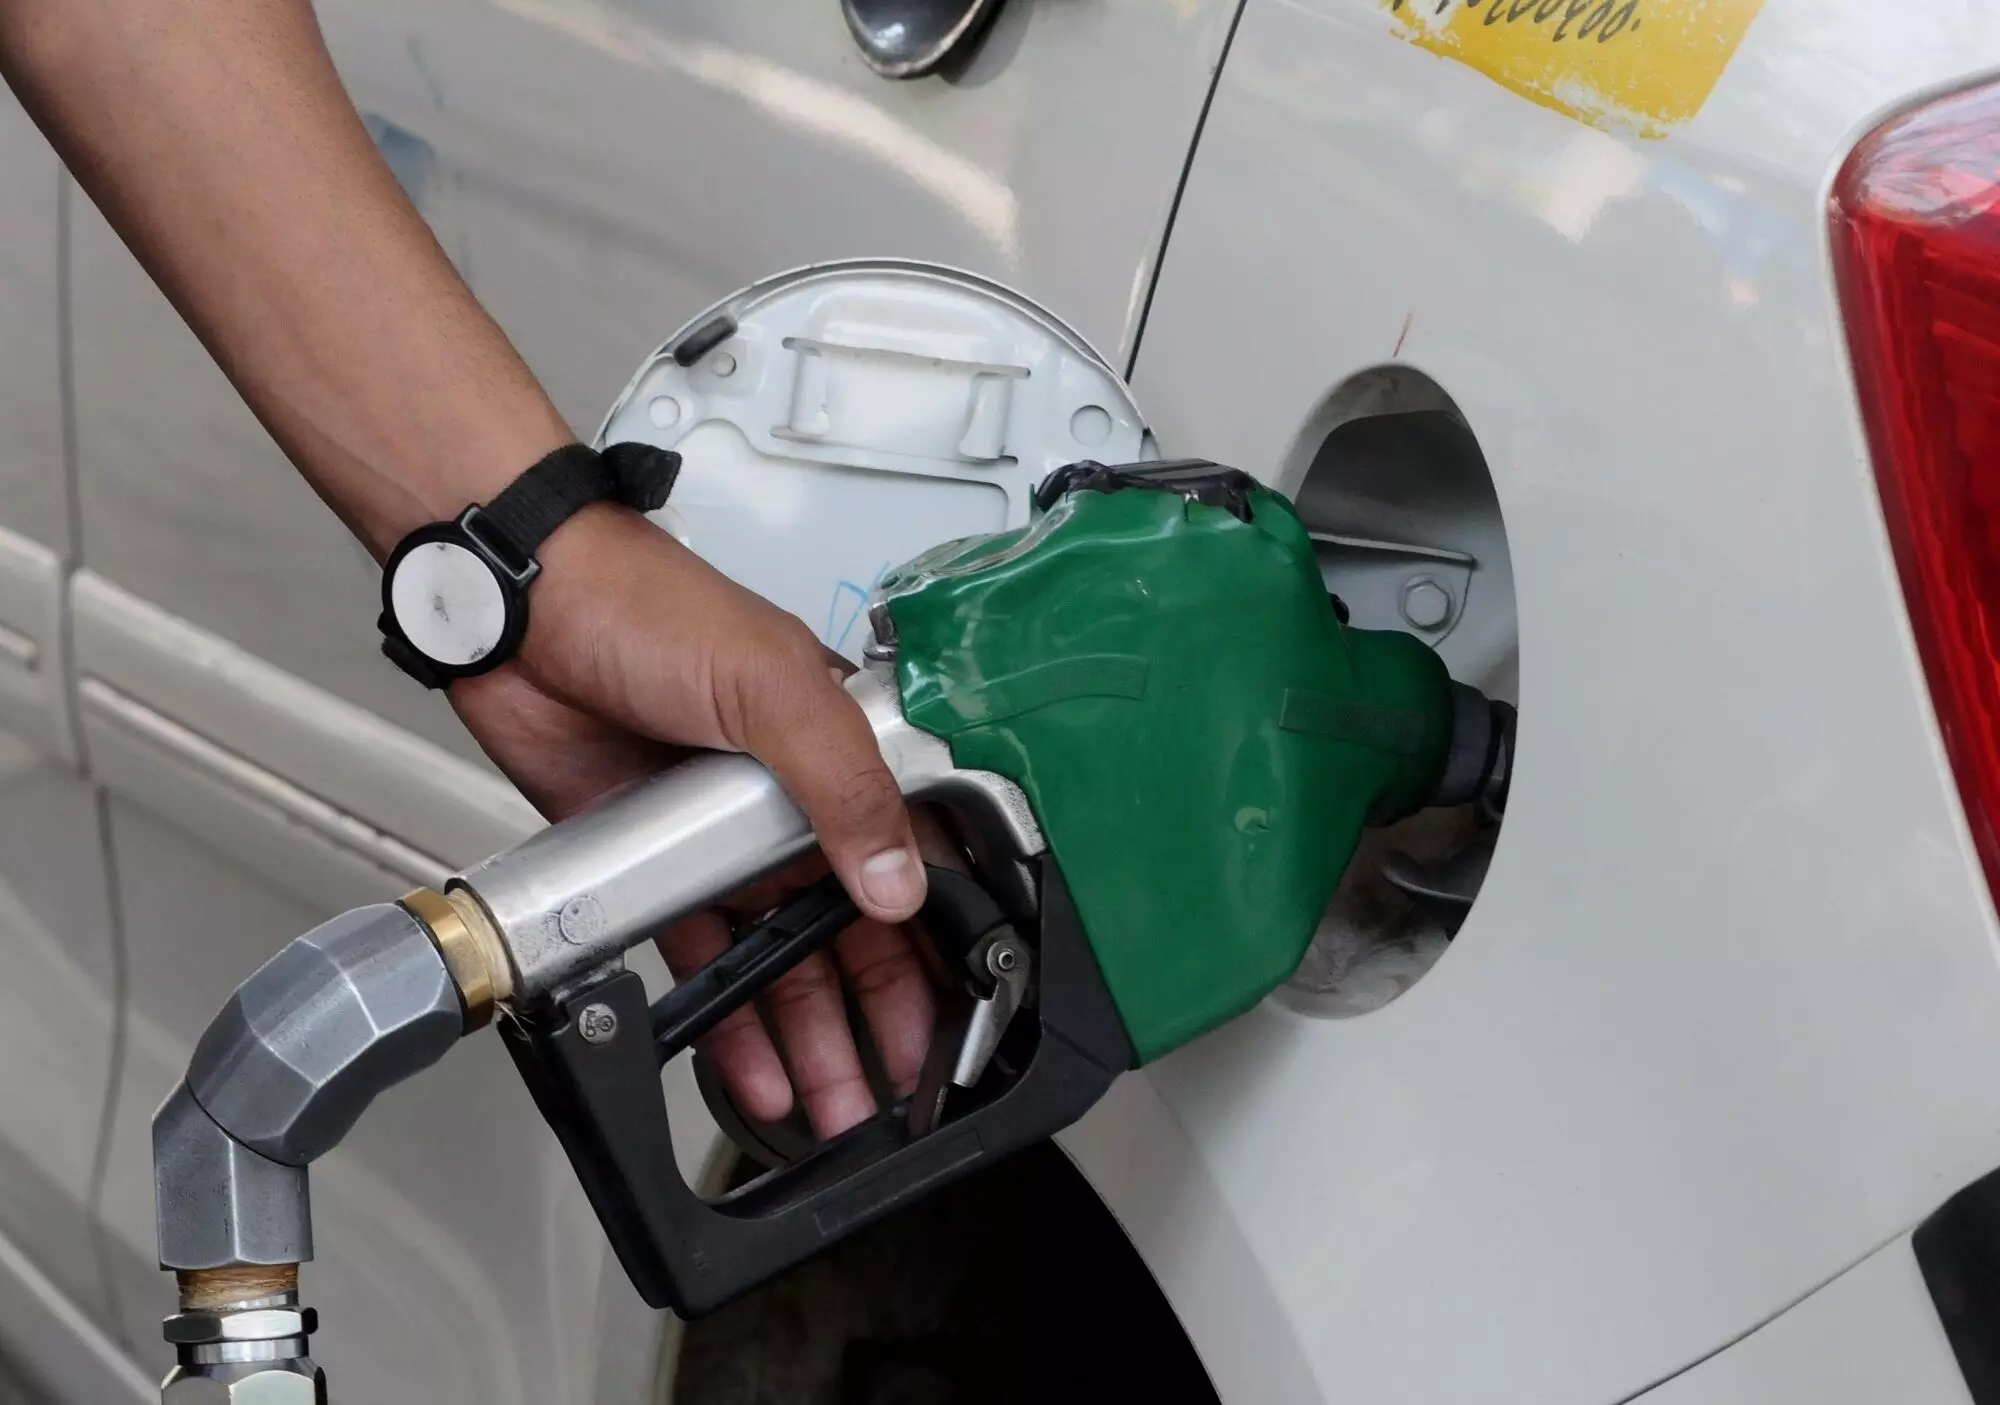 Delhi government issues draft policy to make PUC certificate mandatory at fuel pumps